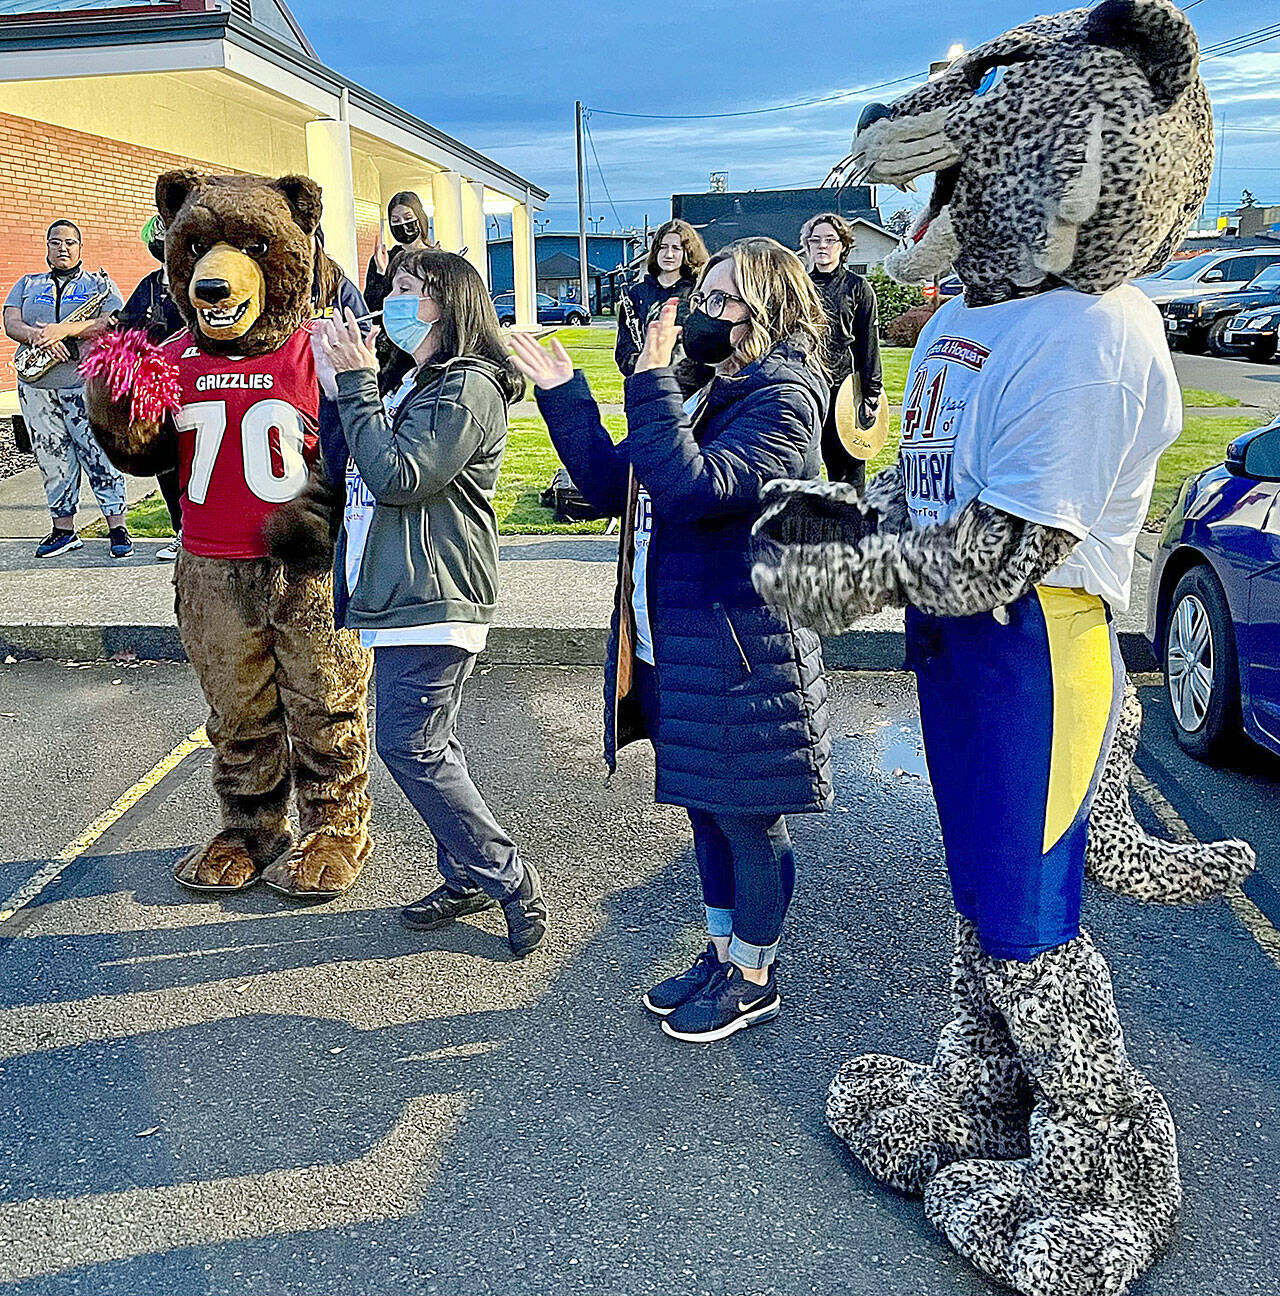 Courtesy of Coastal Harvest 
The final Food Ball numbers are celebrated by Hoquiam advisor Katie Barr, left, and Aberdeen advisor Ashley Kohlmeier, flanked by the Hoquiam Grizzly and Aberdeen Bobcat mascots, Monday, Nov. 8, 2021, at the Grays Harbor PUD office.